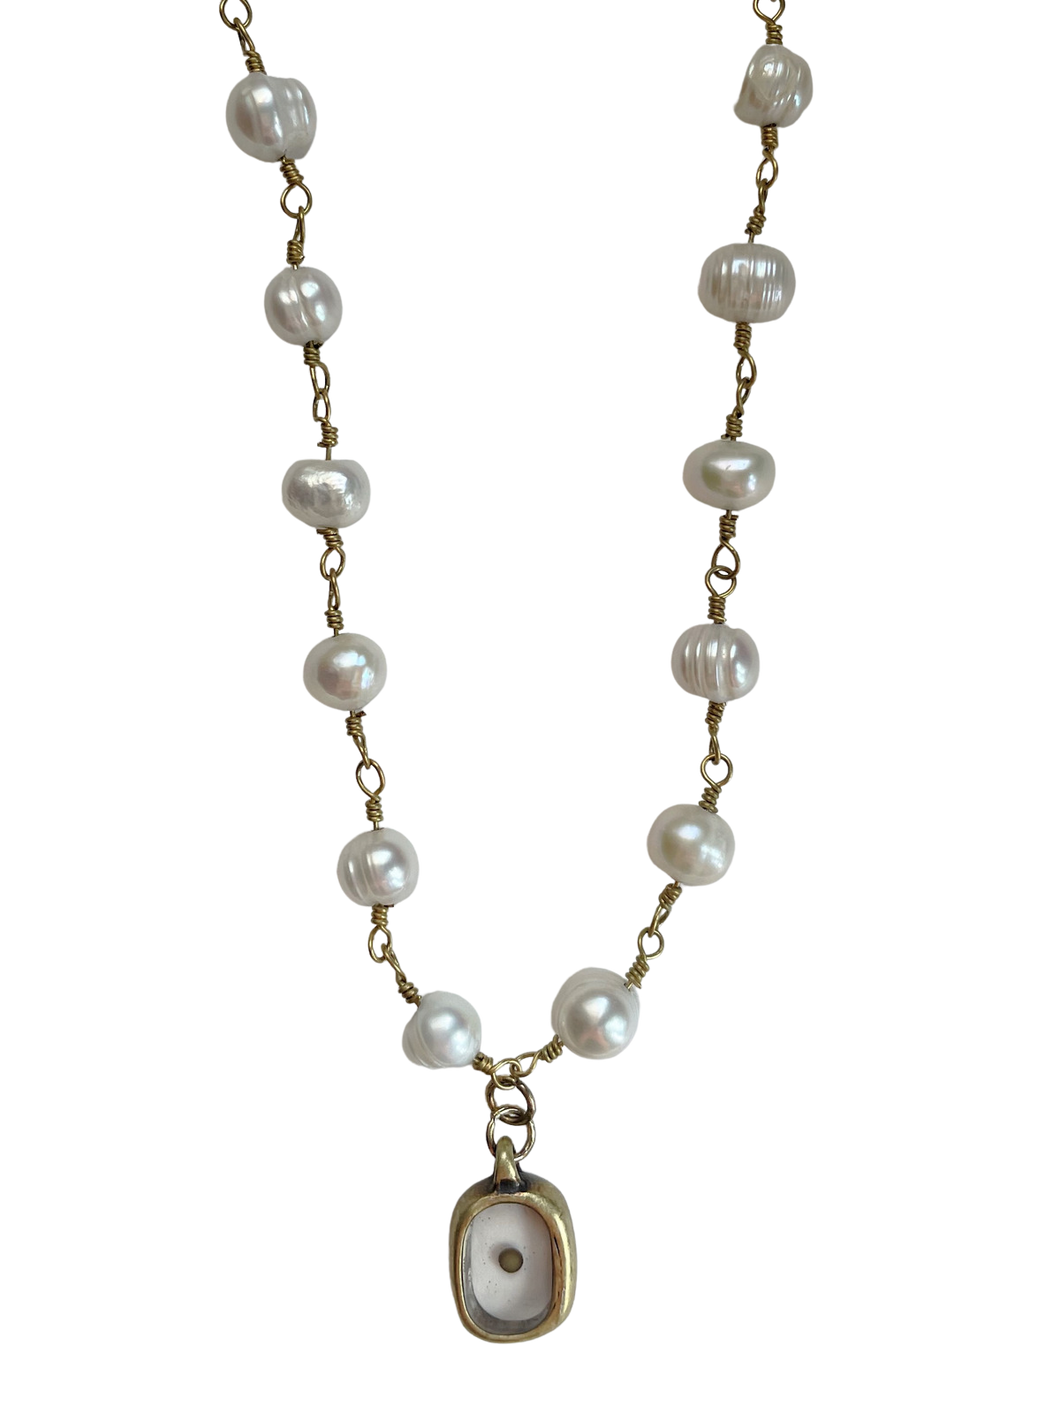 Mustard Seed Charm Necklace - Freshwater Pearl